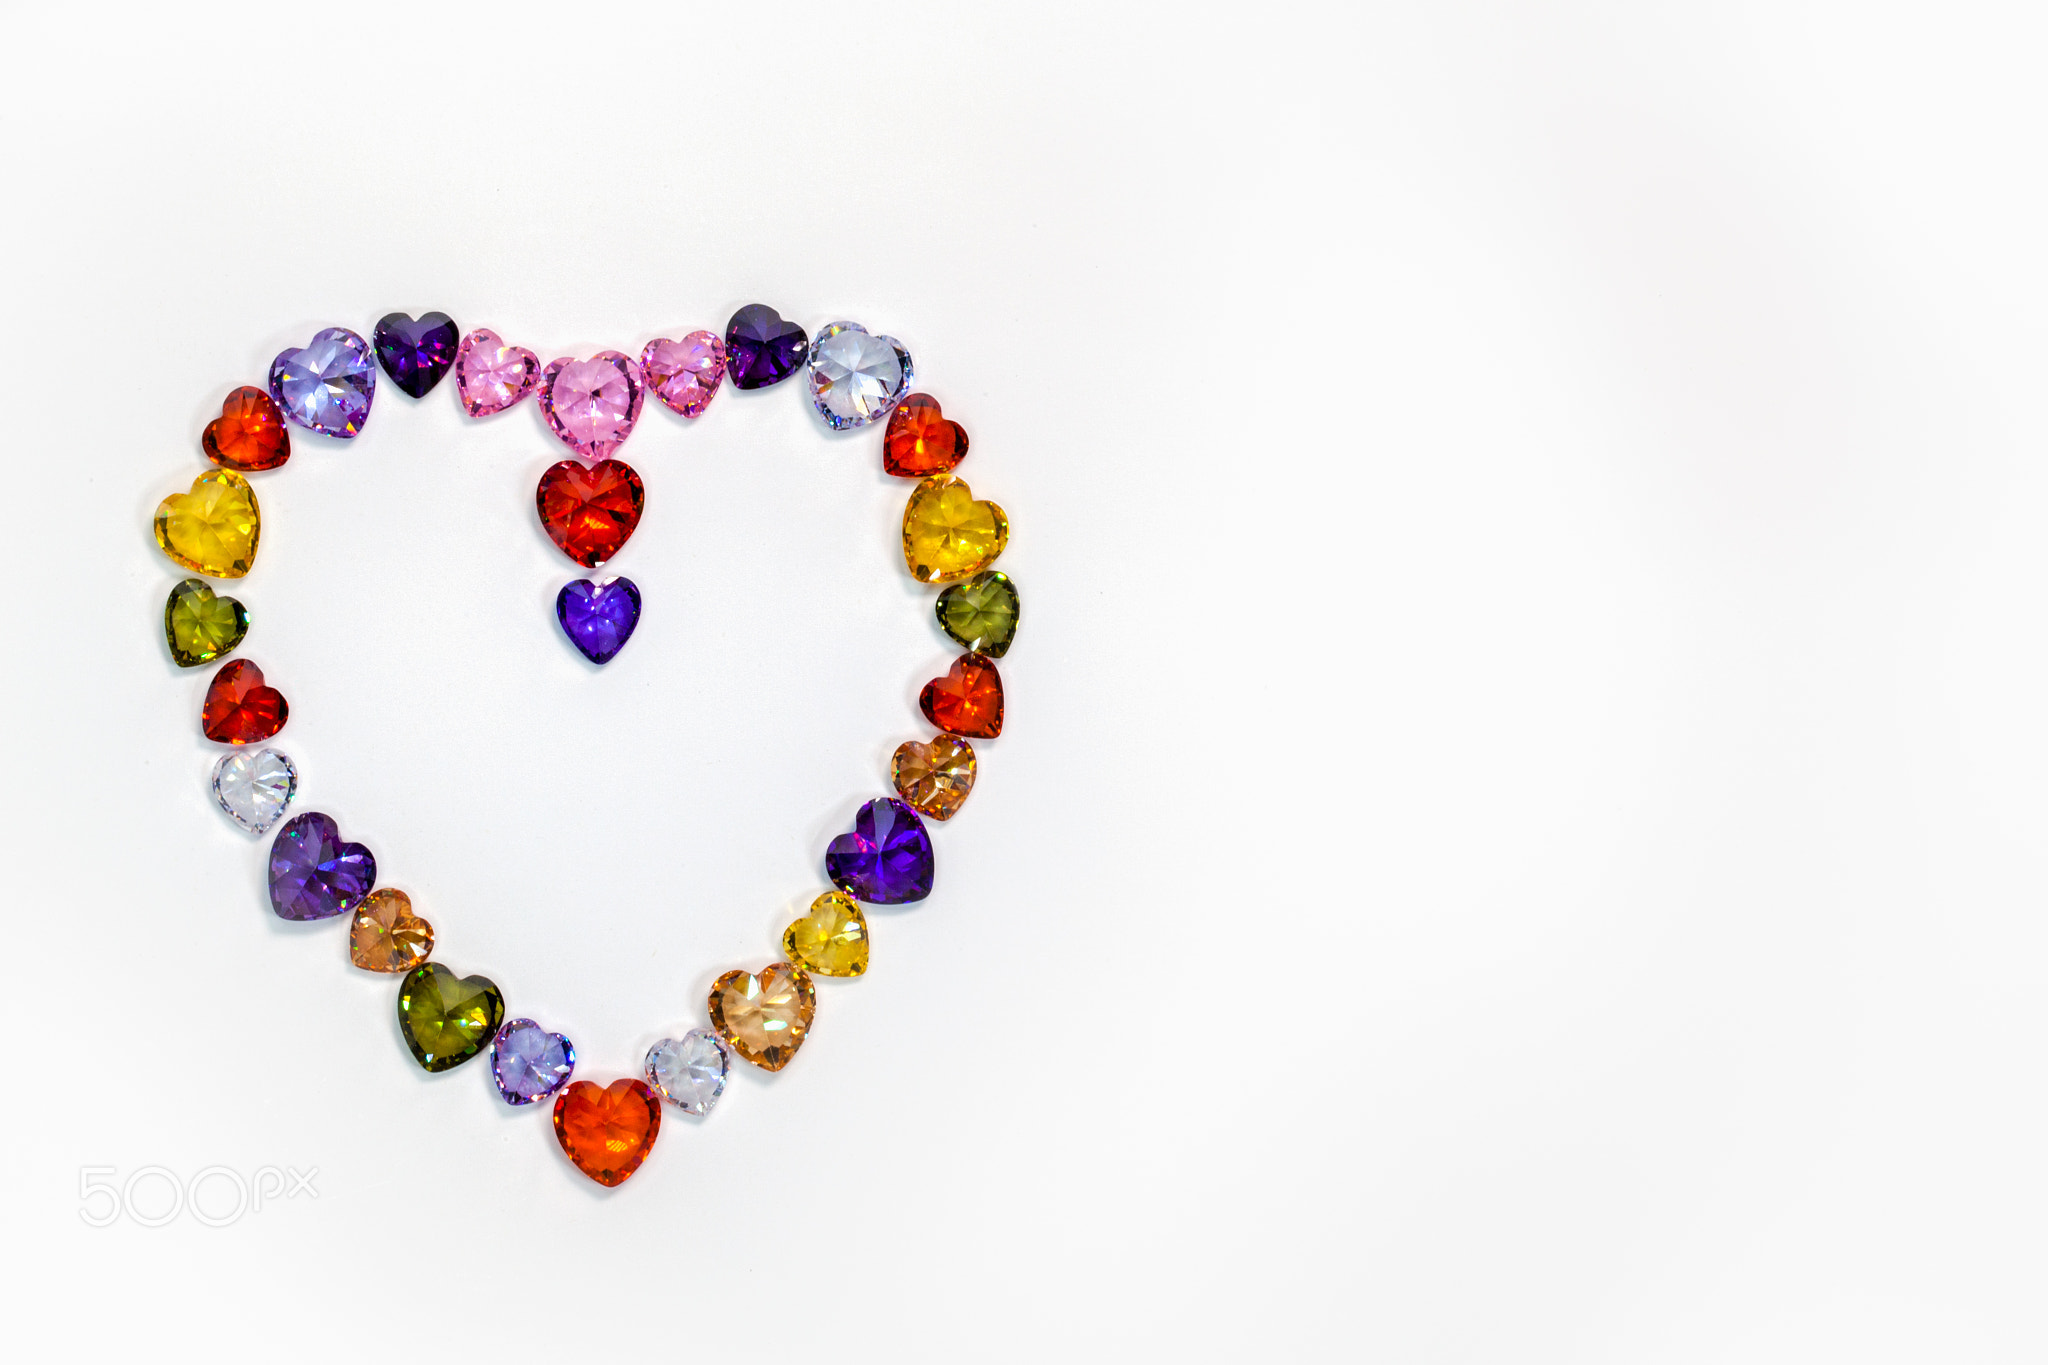 heart decorated with colorful diamonds for valentine day